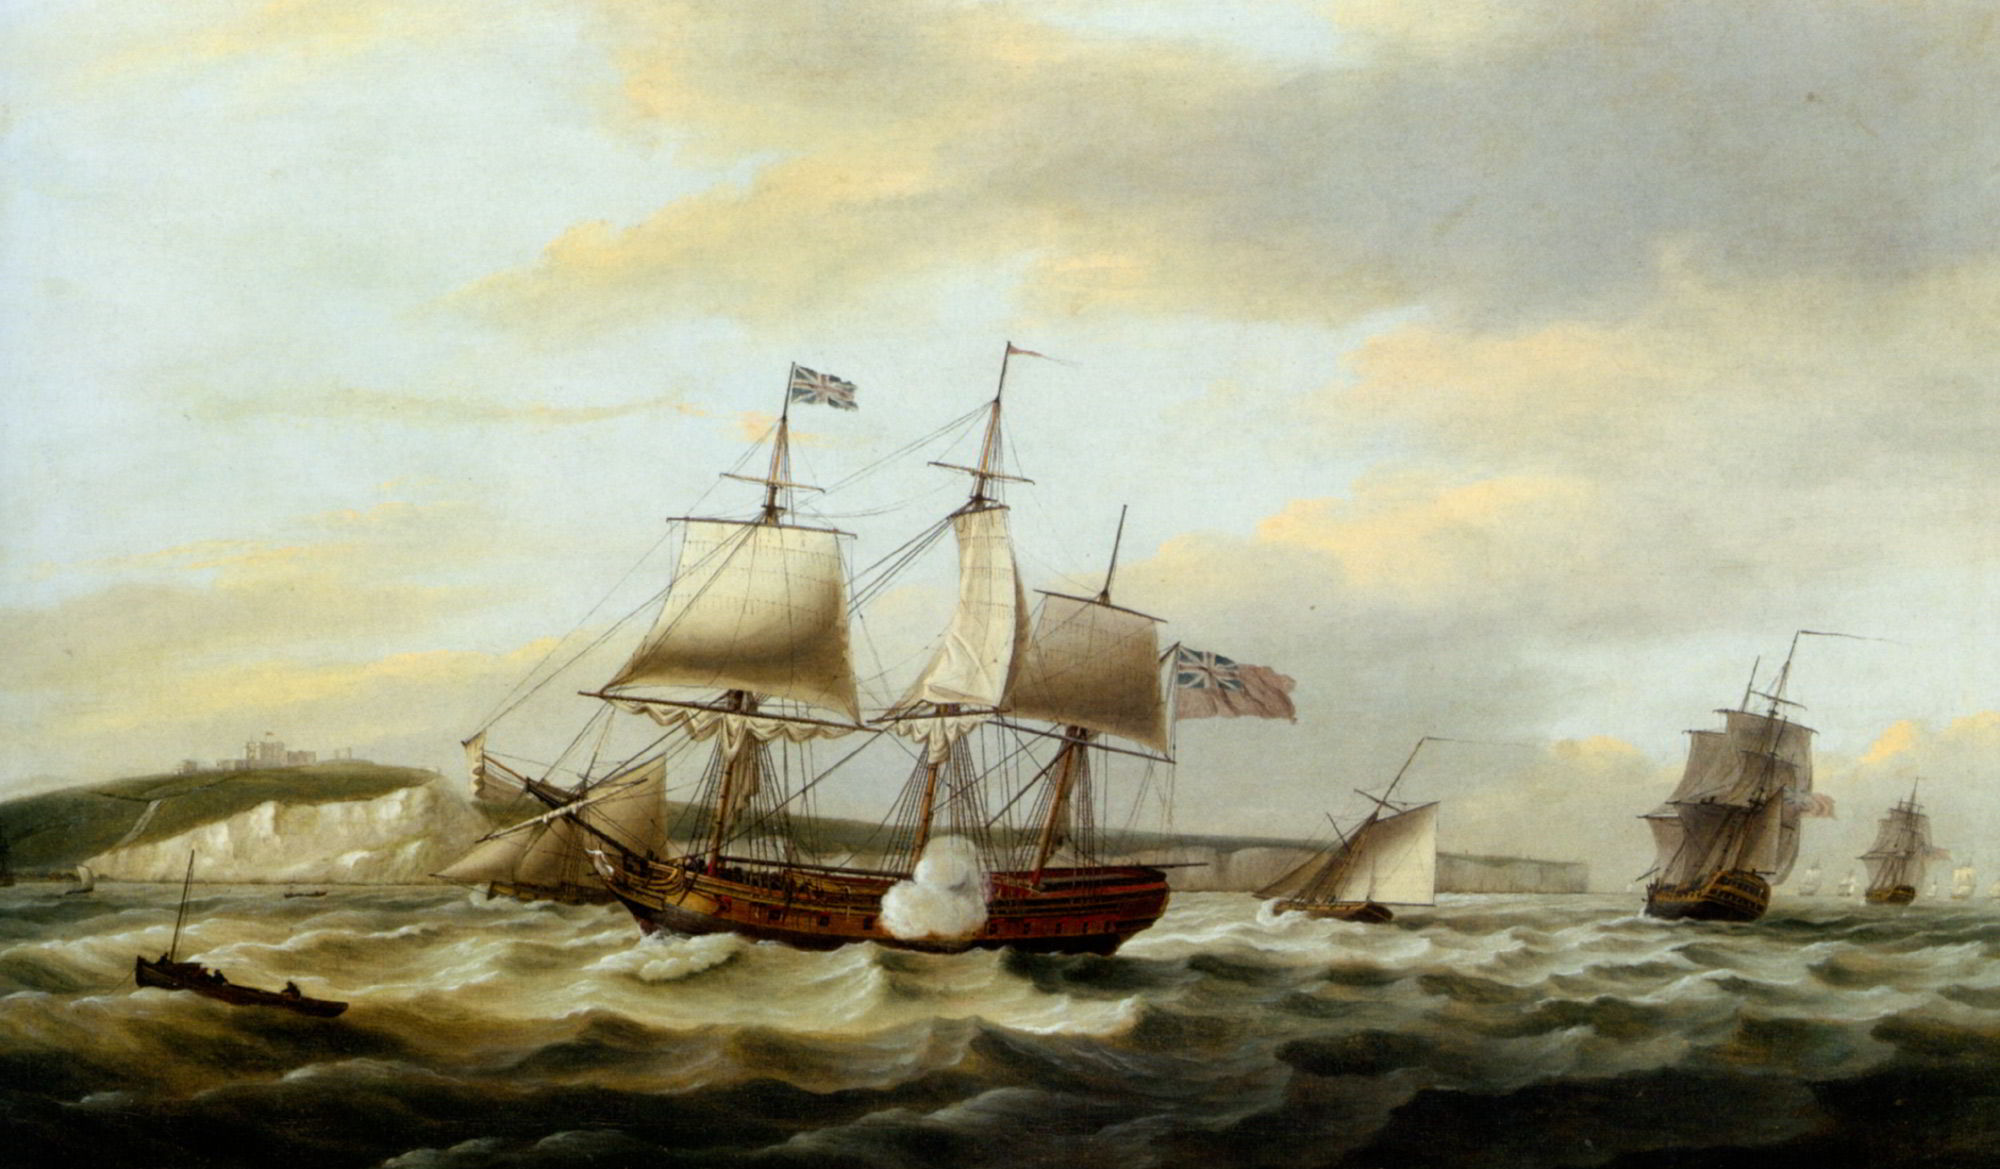 A Merchant Ship Signaling for a Pilot of the Cliffs of Dover by Thomas Luny